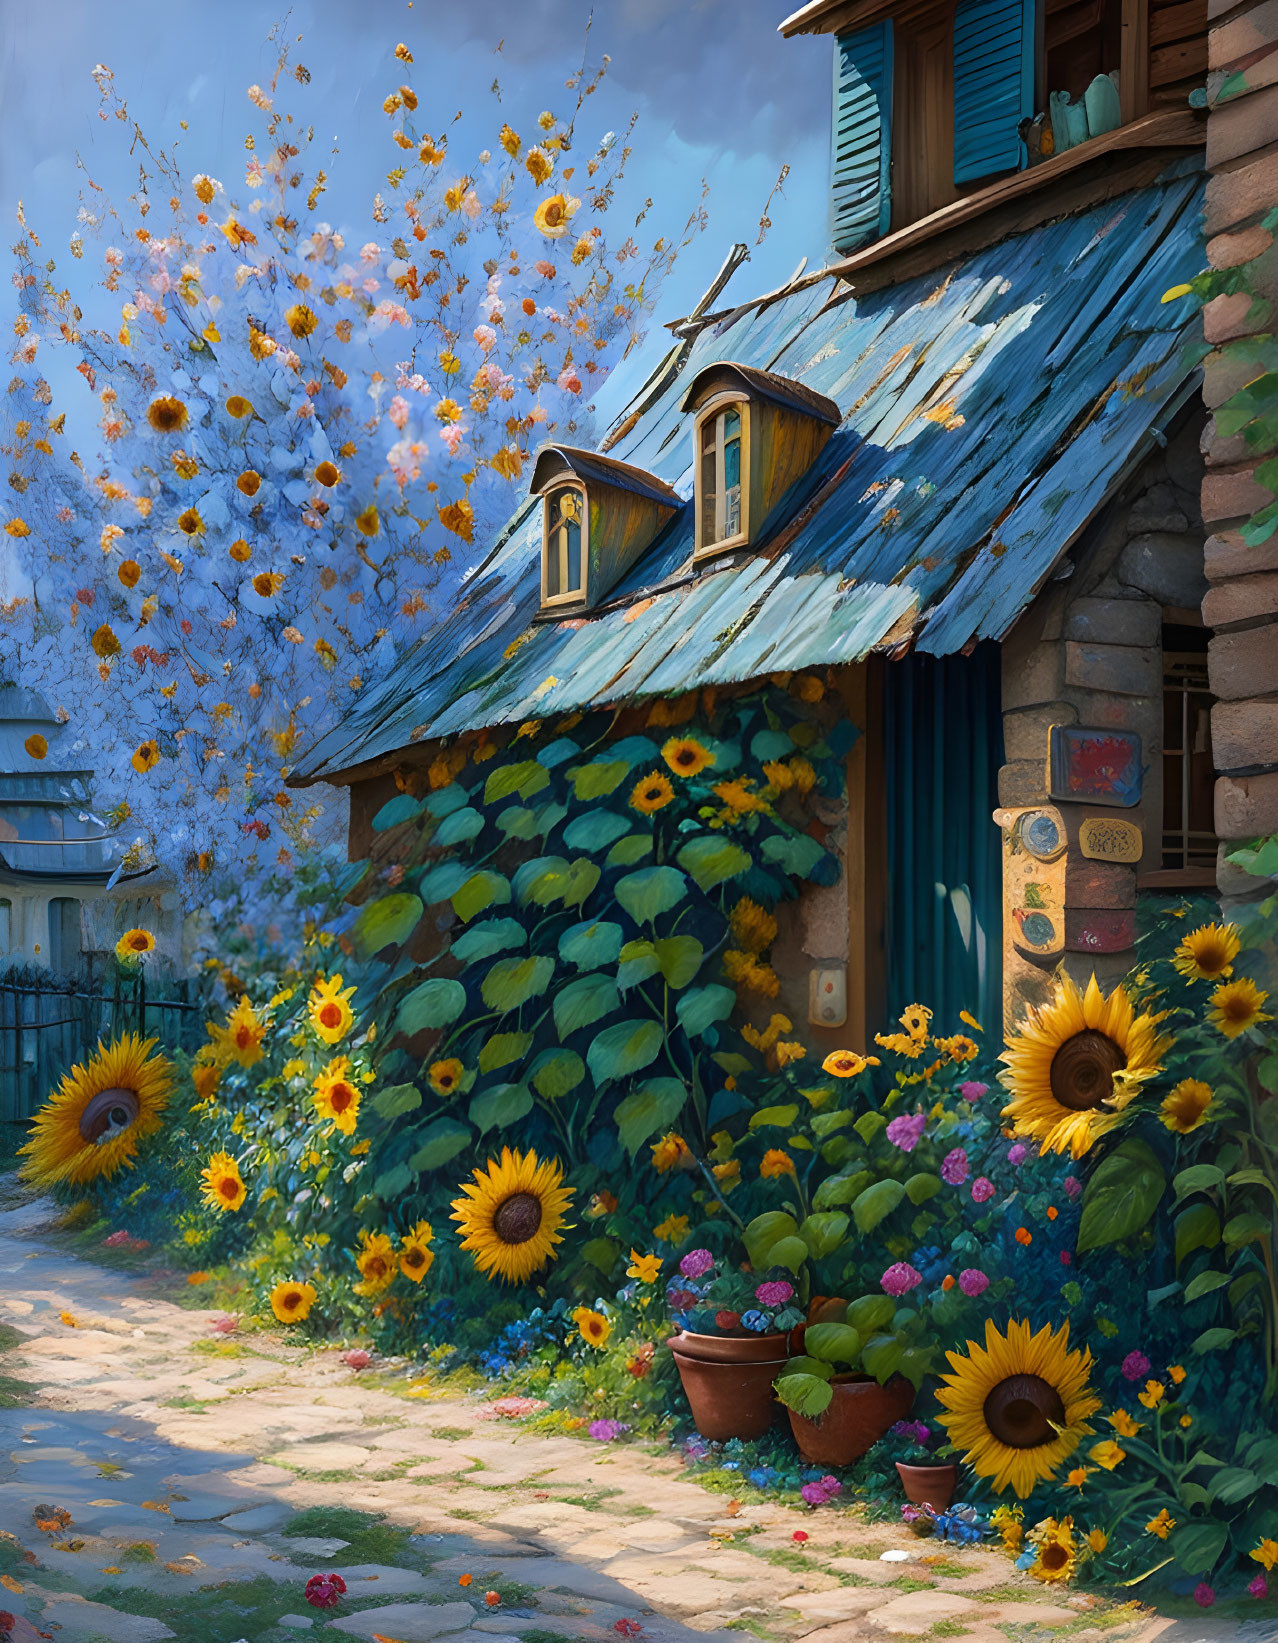 Stone cottage with blue roof surrounded by sunflowers and flowers under a sky of floating petals